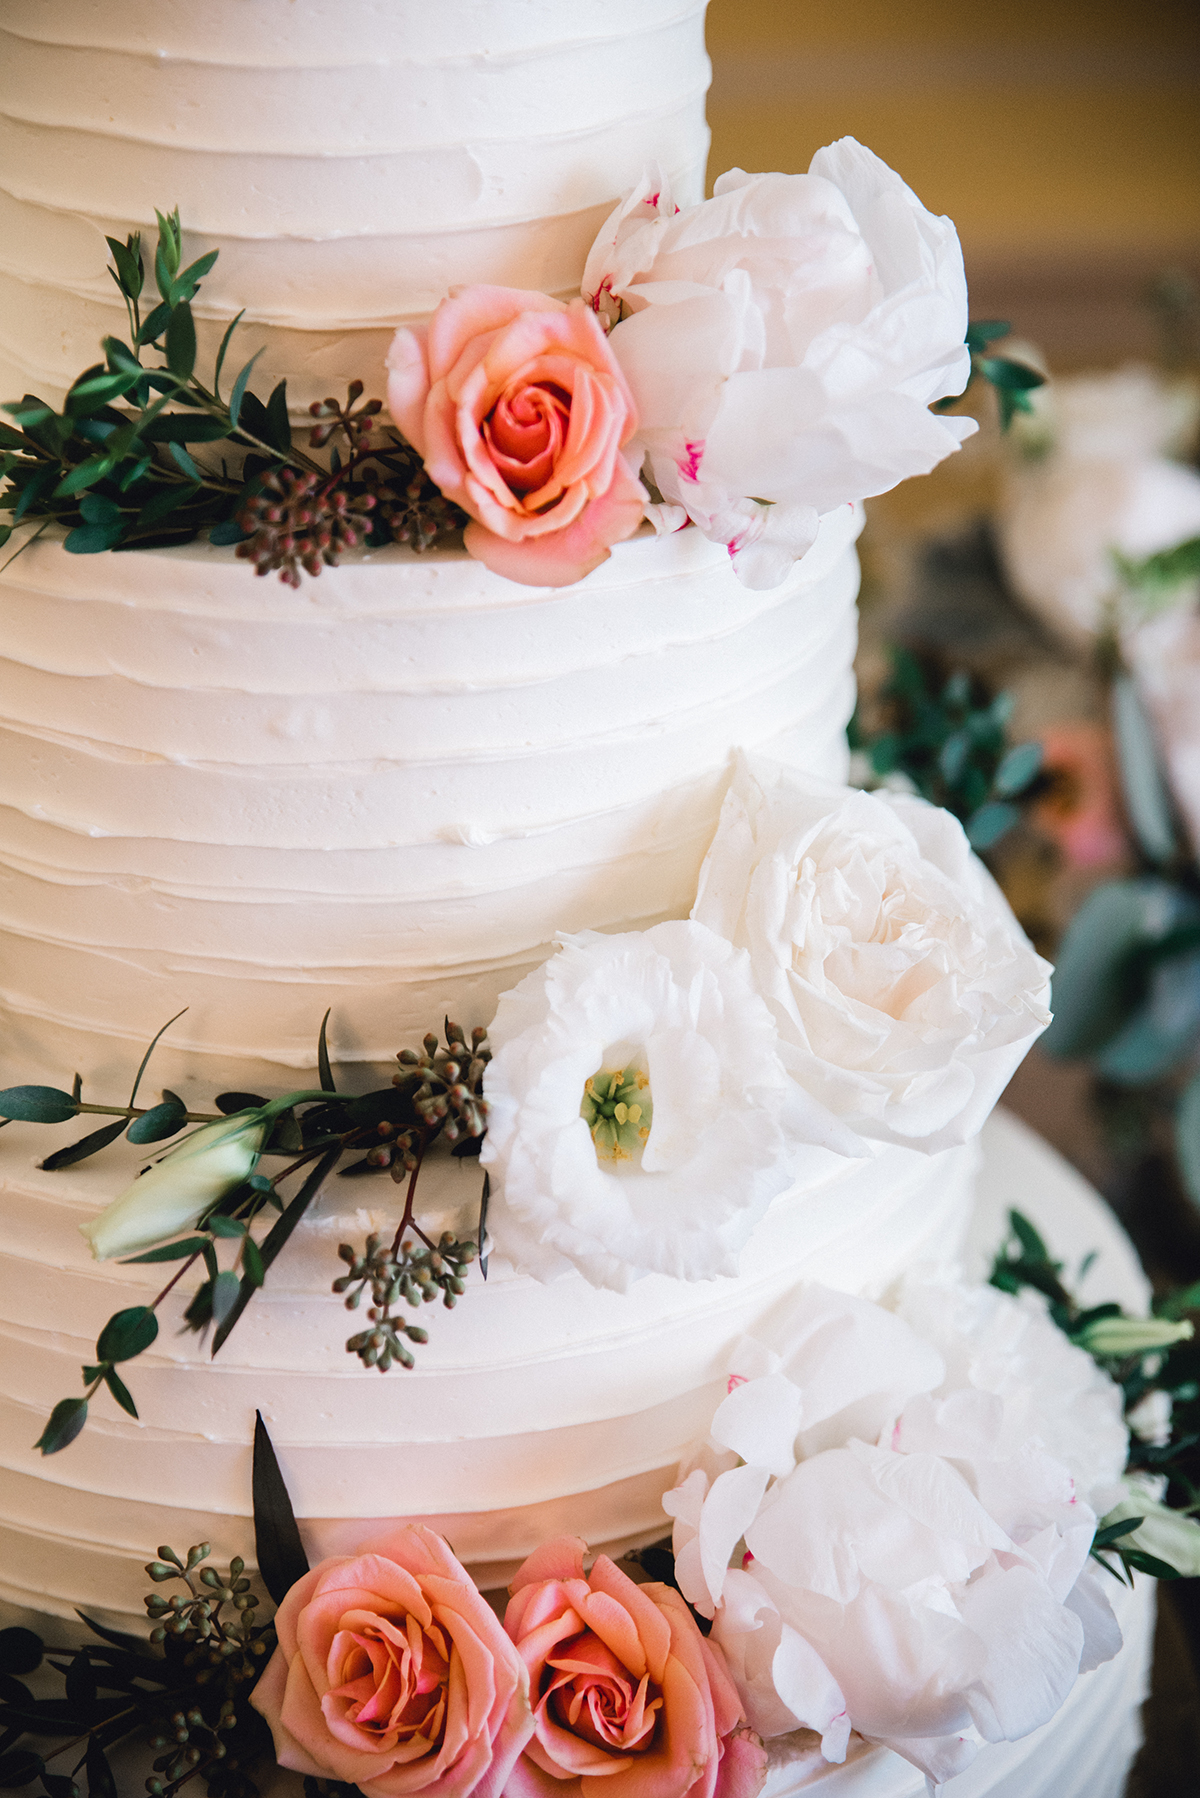 Wedding Cake with White and Pink Flowers